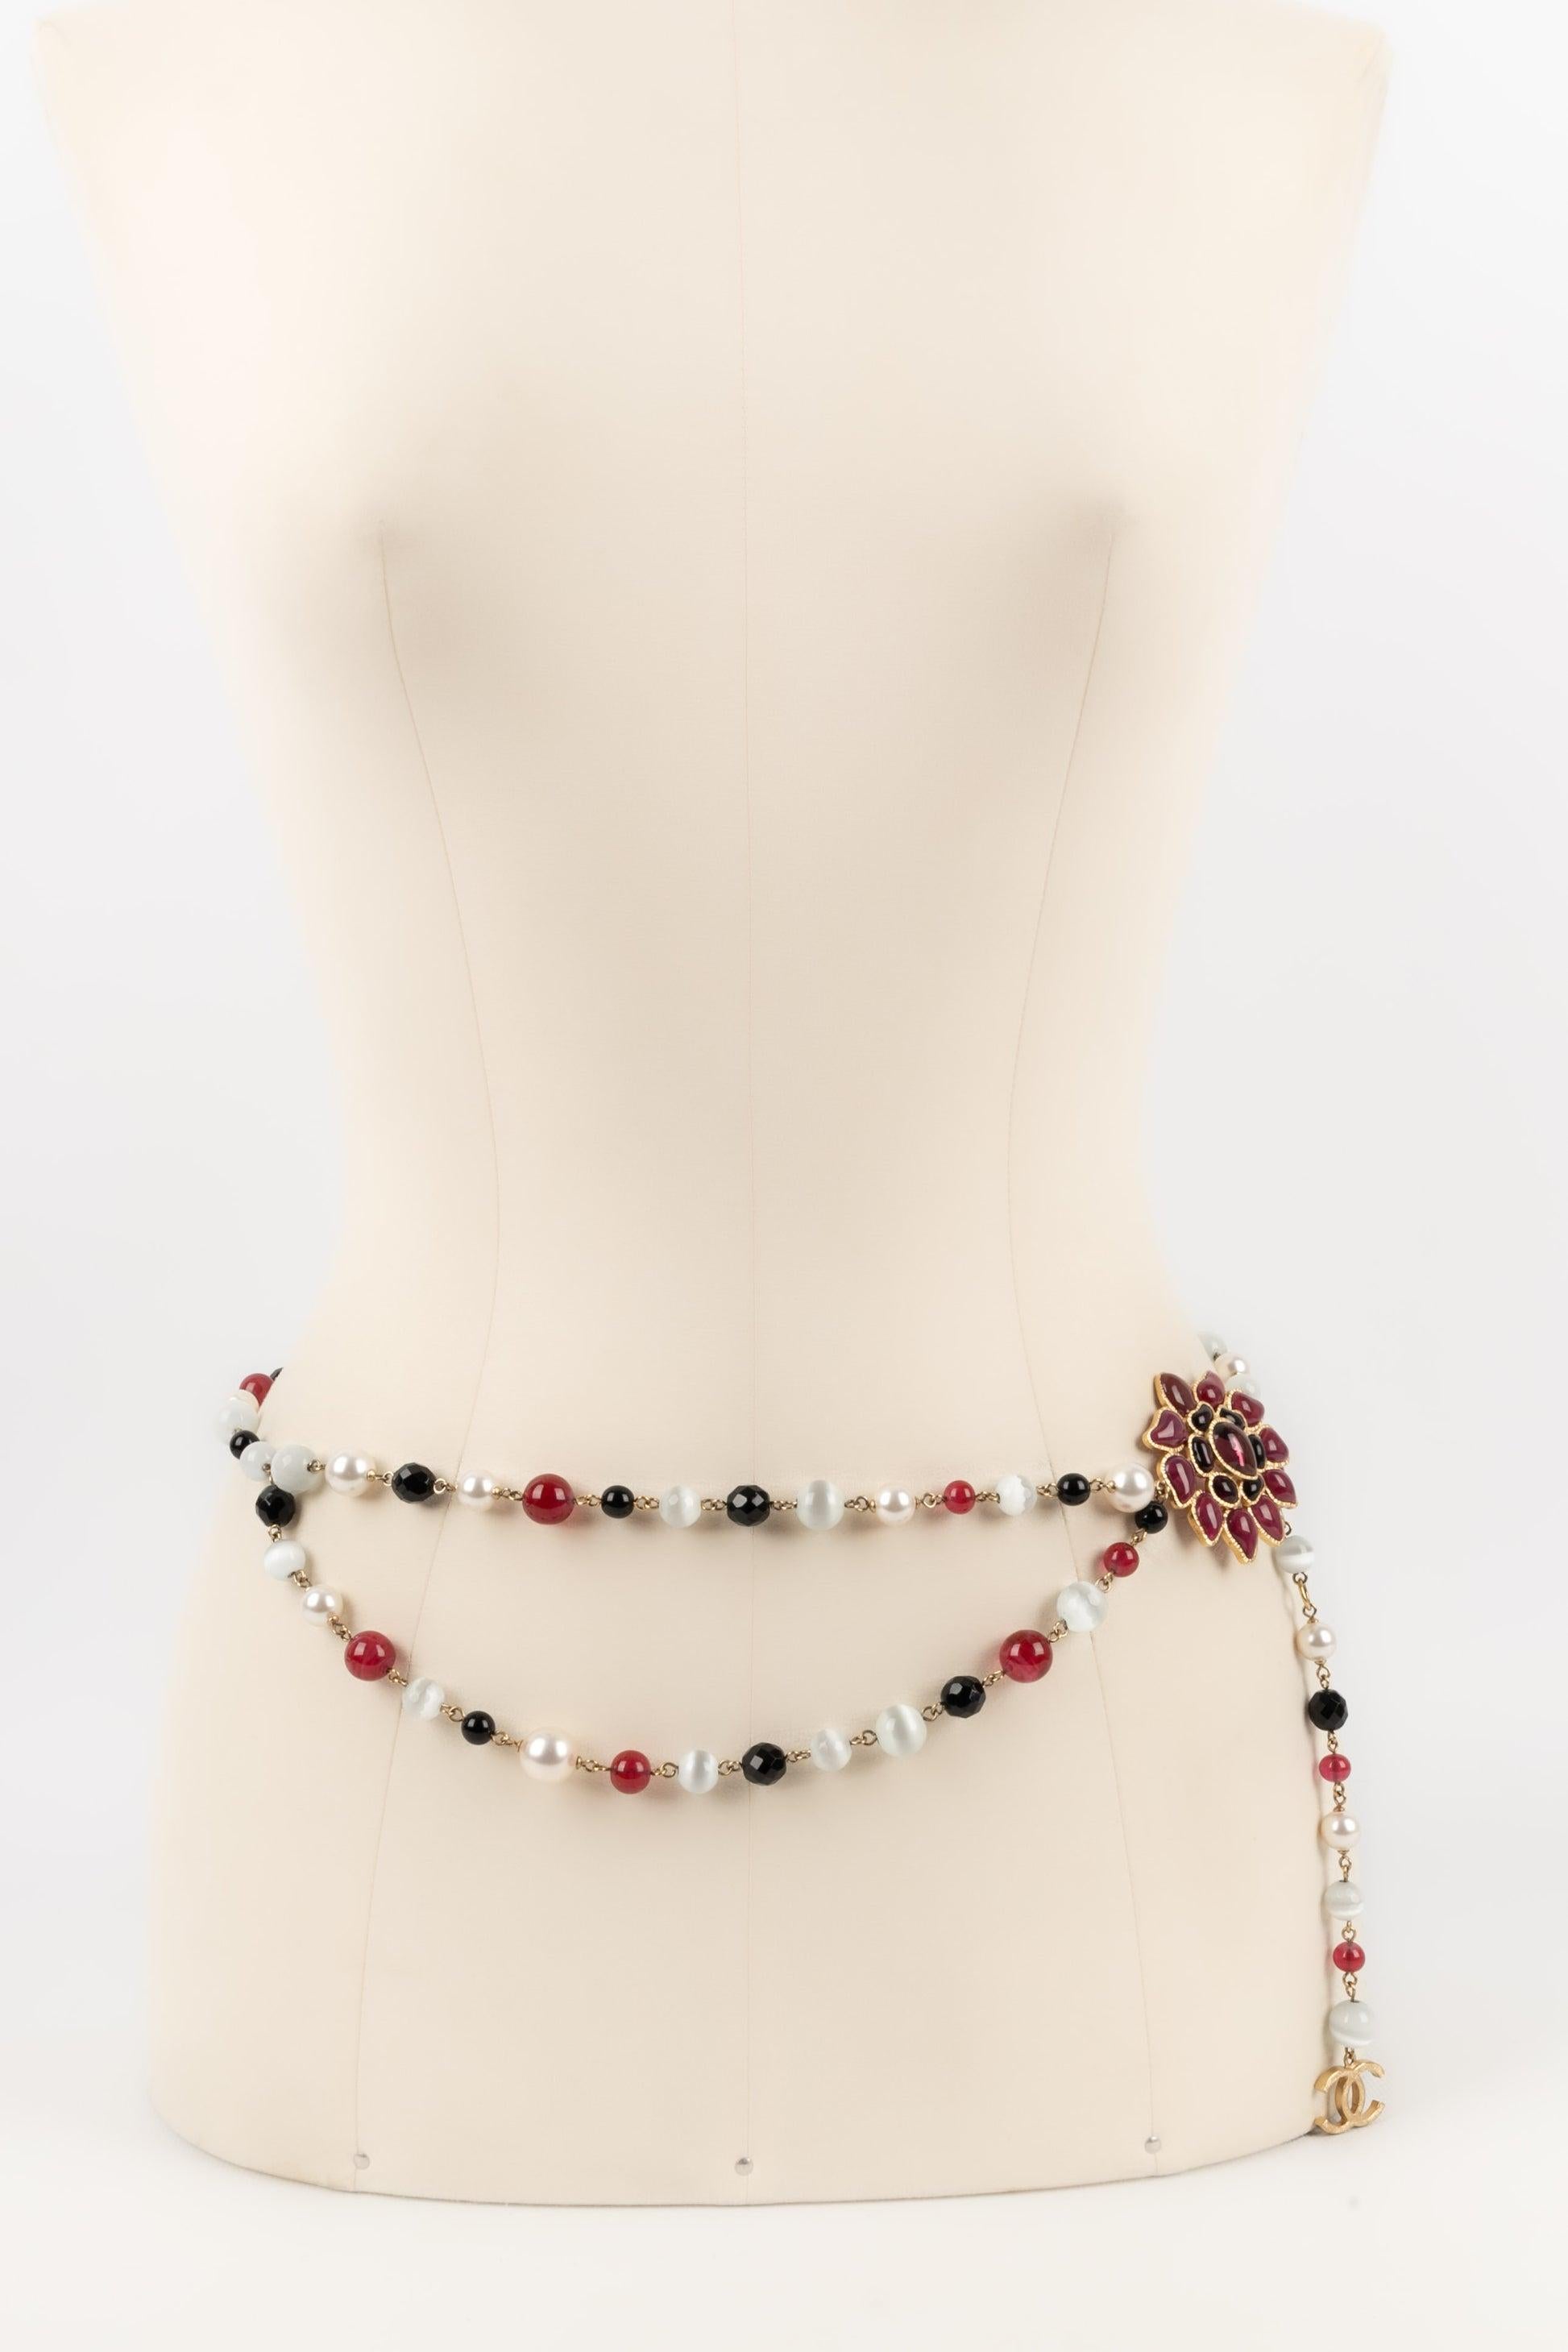 Chanel Costume Pearl Belt with Glass Paste Flower-Shaped Buckle, 2007 5